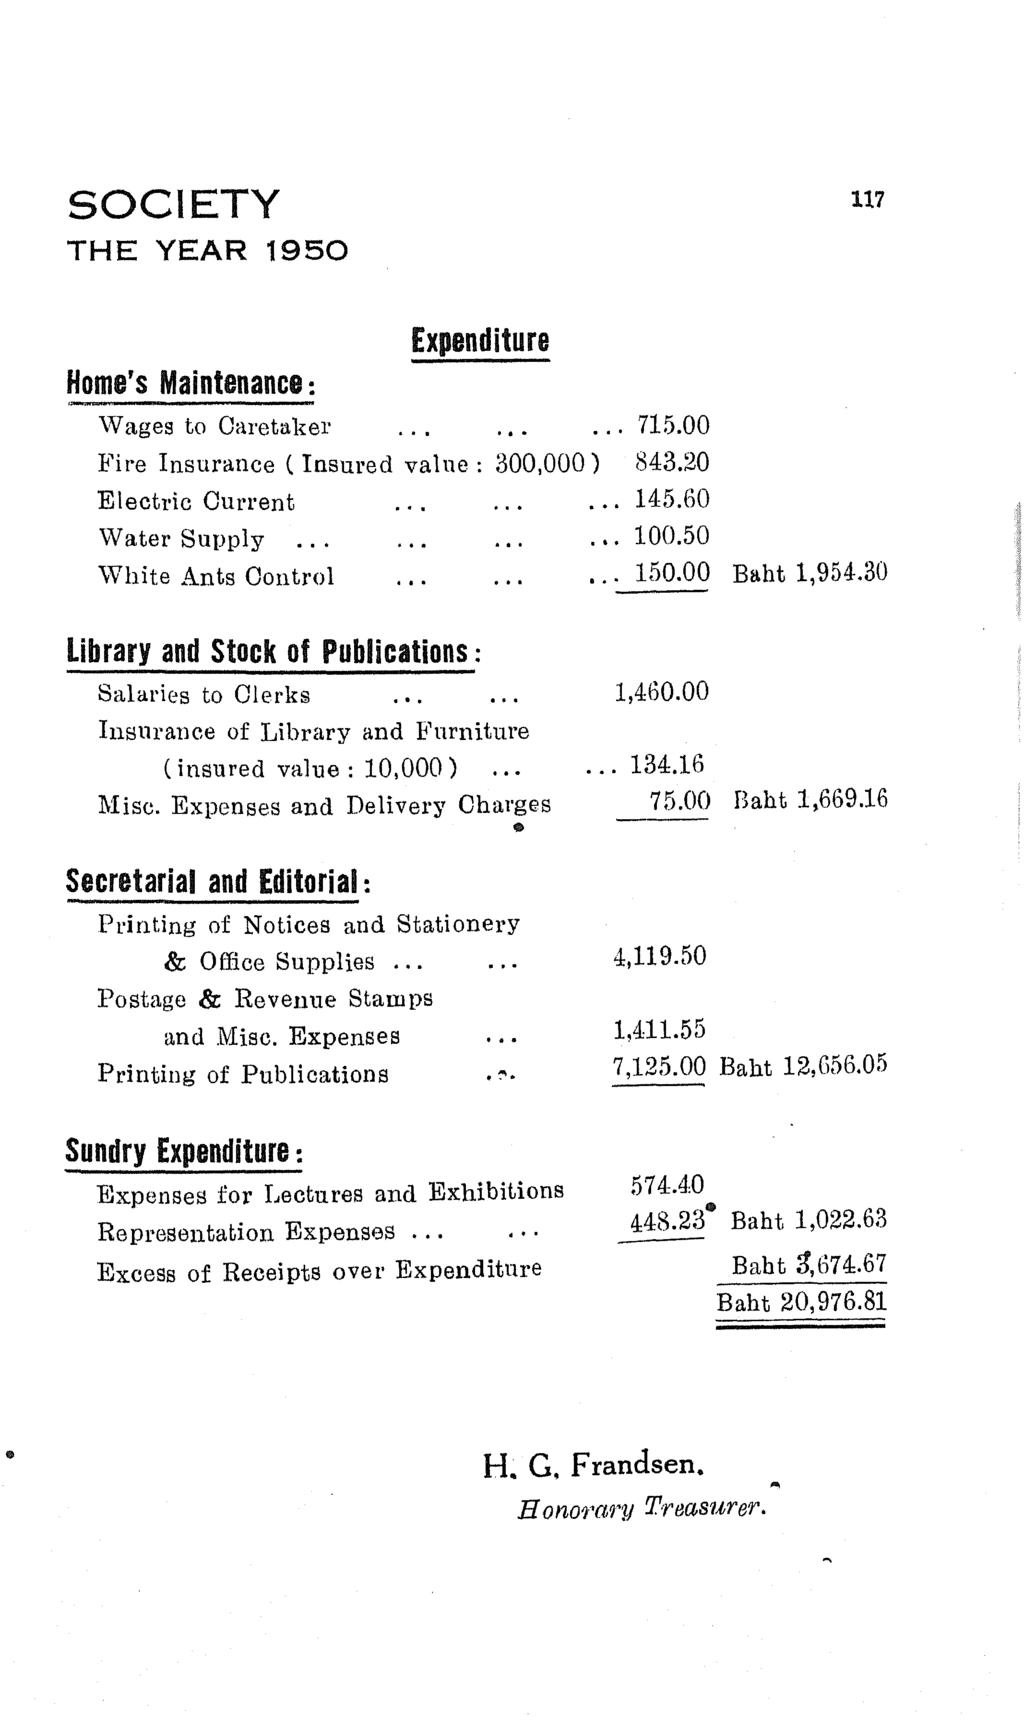 SOCIETY THE YEAR 1950 117 Home's Maintenance: Expenditure Vvages to Caretaker... 715.00 Fir e Insurance (Insured value: 300,000) 843.20 Electric Current 145.60 Water Supply 100.